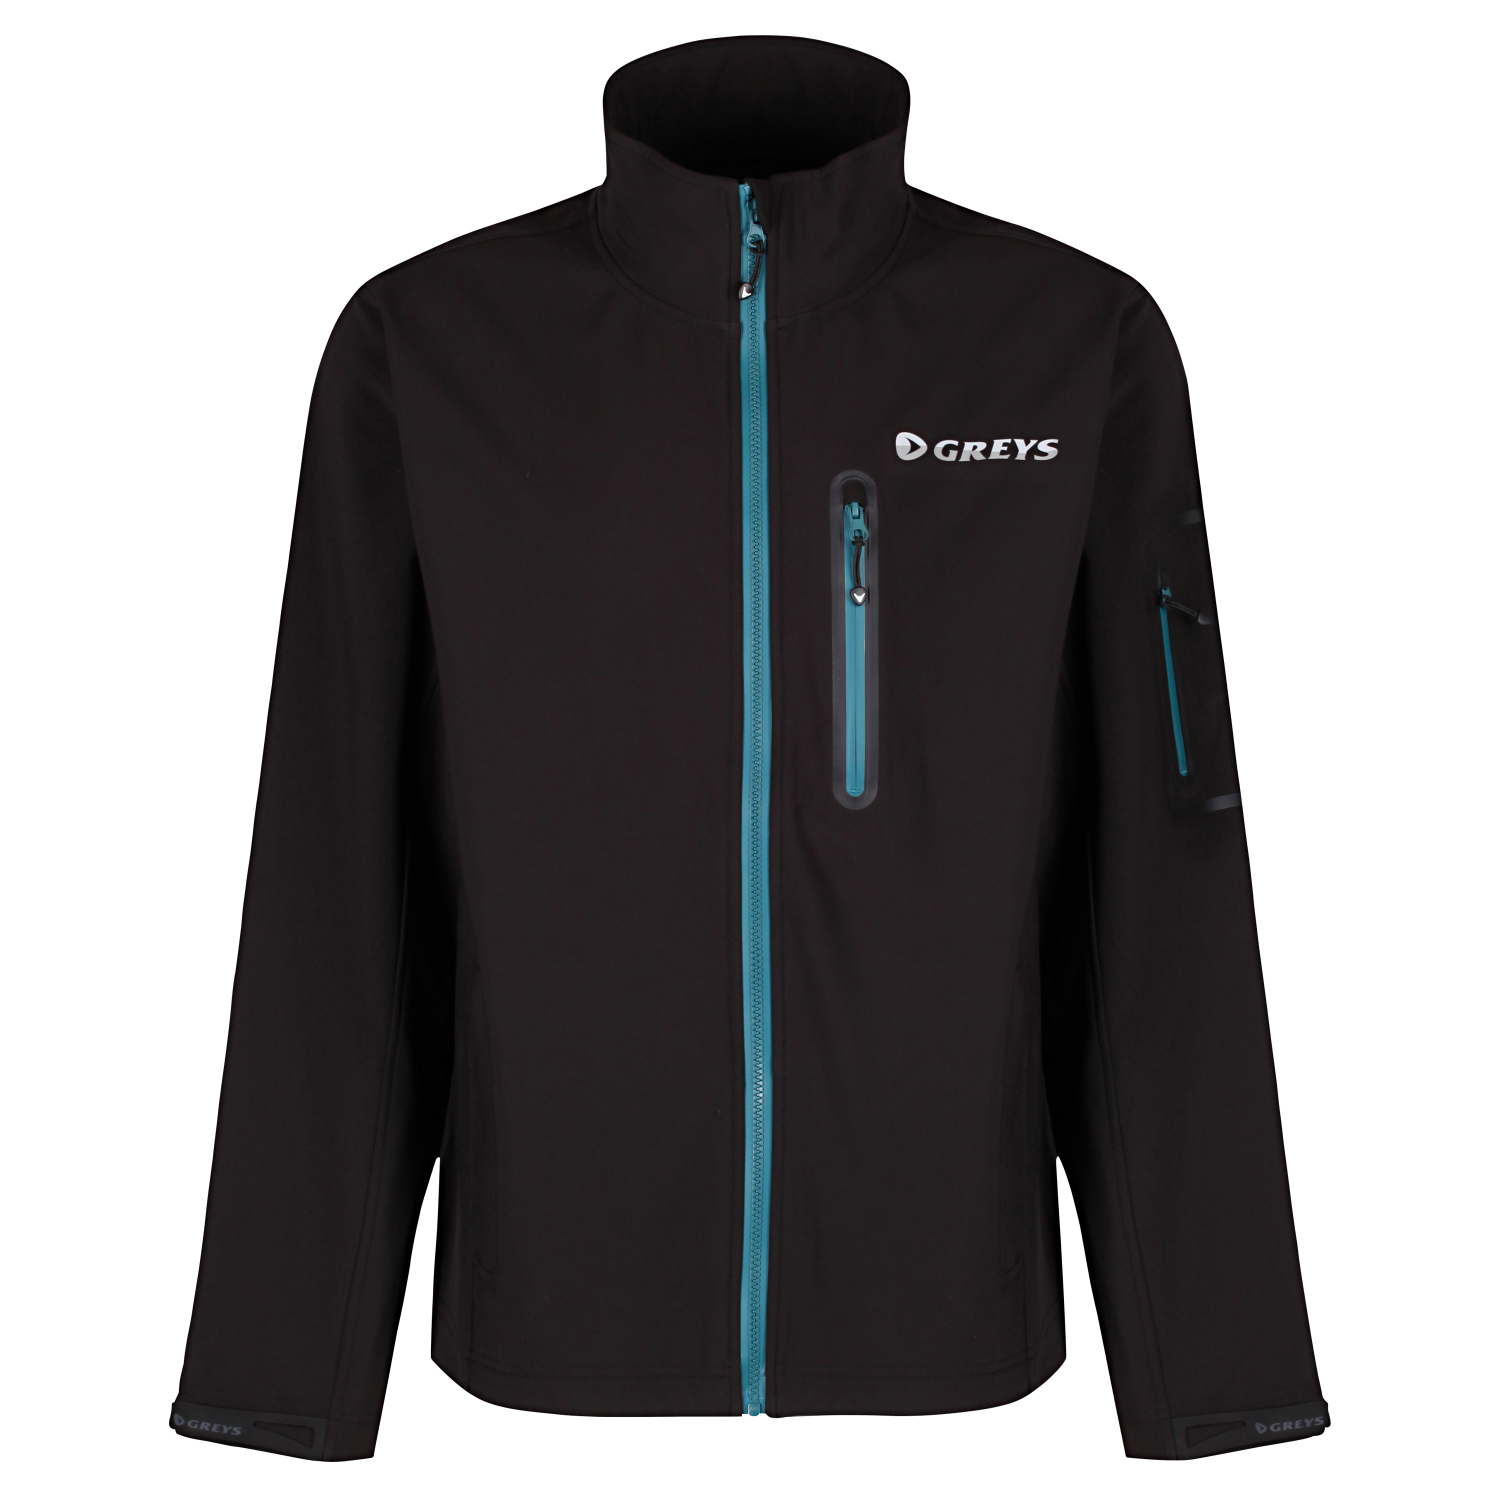 Greys Mens Softshell Jacket at low prices